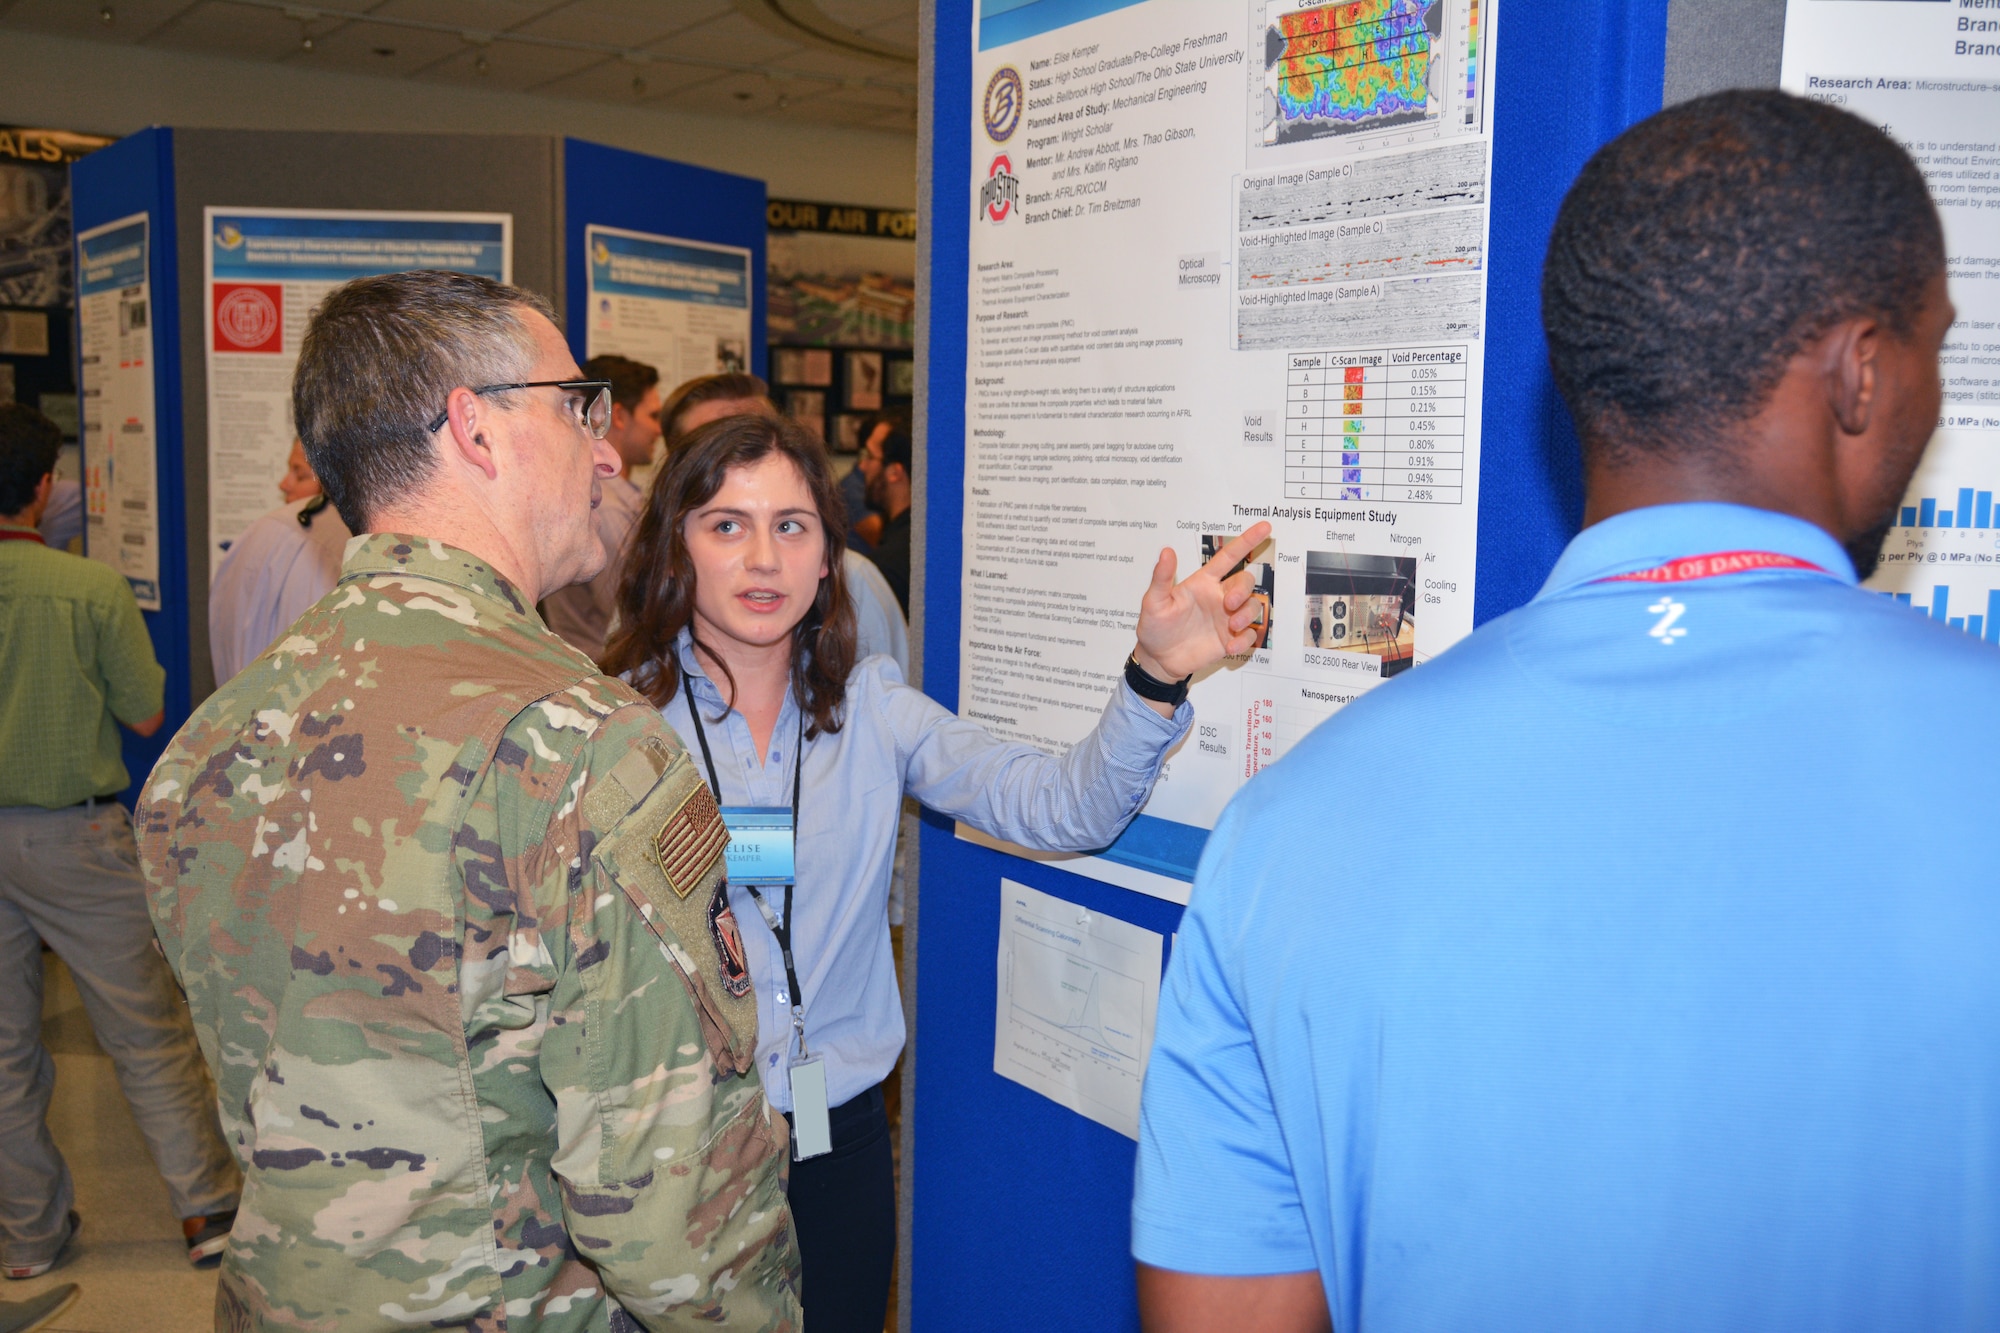 Elise Kemper, a 2019 Belbrook High School graduate, presents her research poster to Maj. Gen. William T. Cooley, commander of the Air Force Research Laboratory, at the summer student research poster session Aug. 1. Kemper’s research area this summer was Polymeric Matrix Composites. She will be attending Ohio State University this fall, studying mechanical engineering. (U.S. Air Force photo/Spencer Deer)